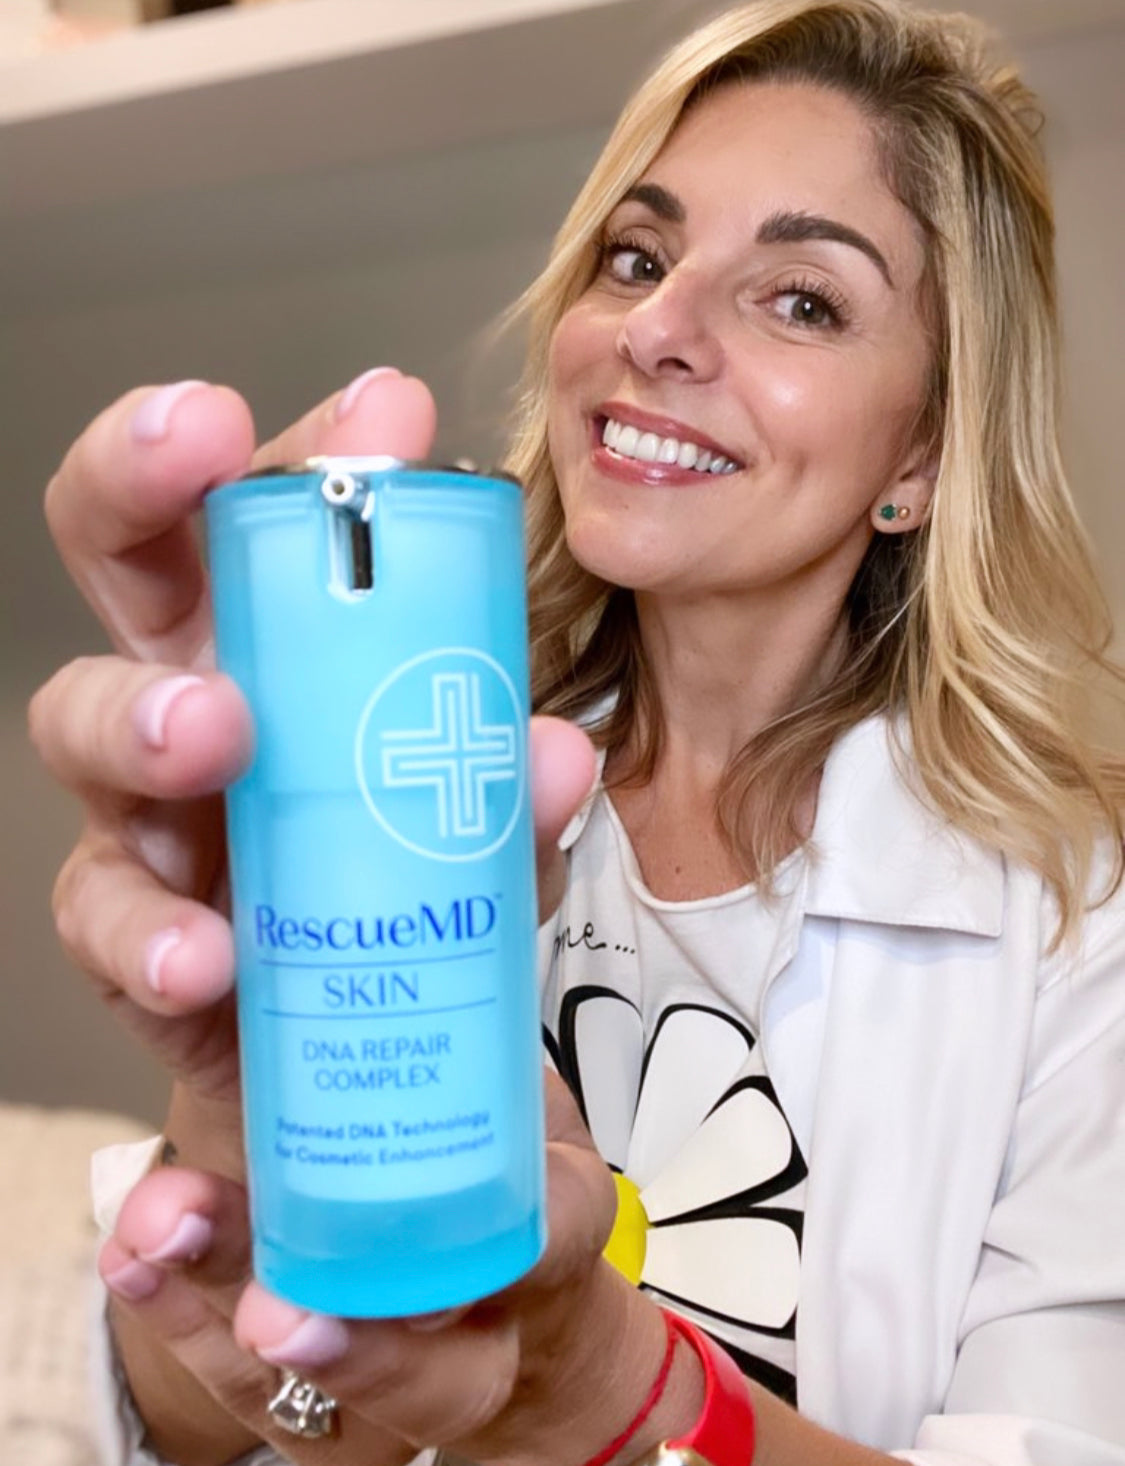 female esthetician happily showing RescueMD product bottle package, recommending to patients